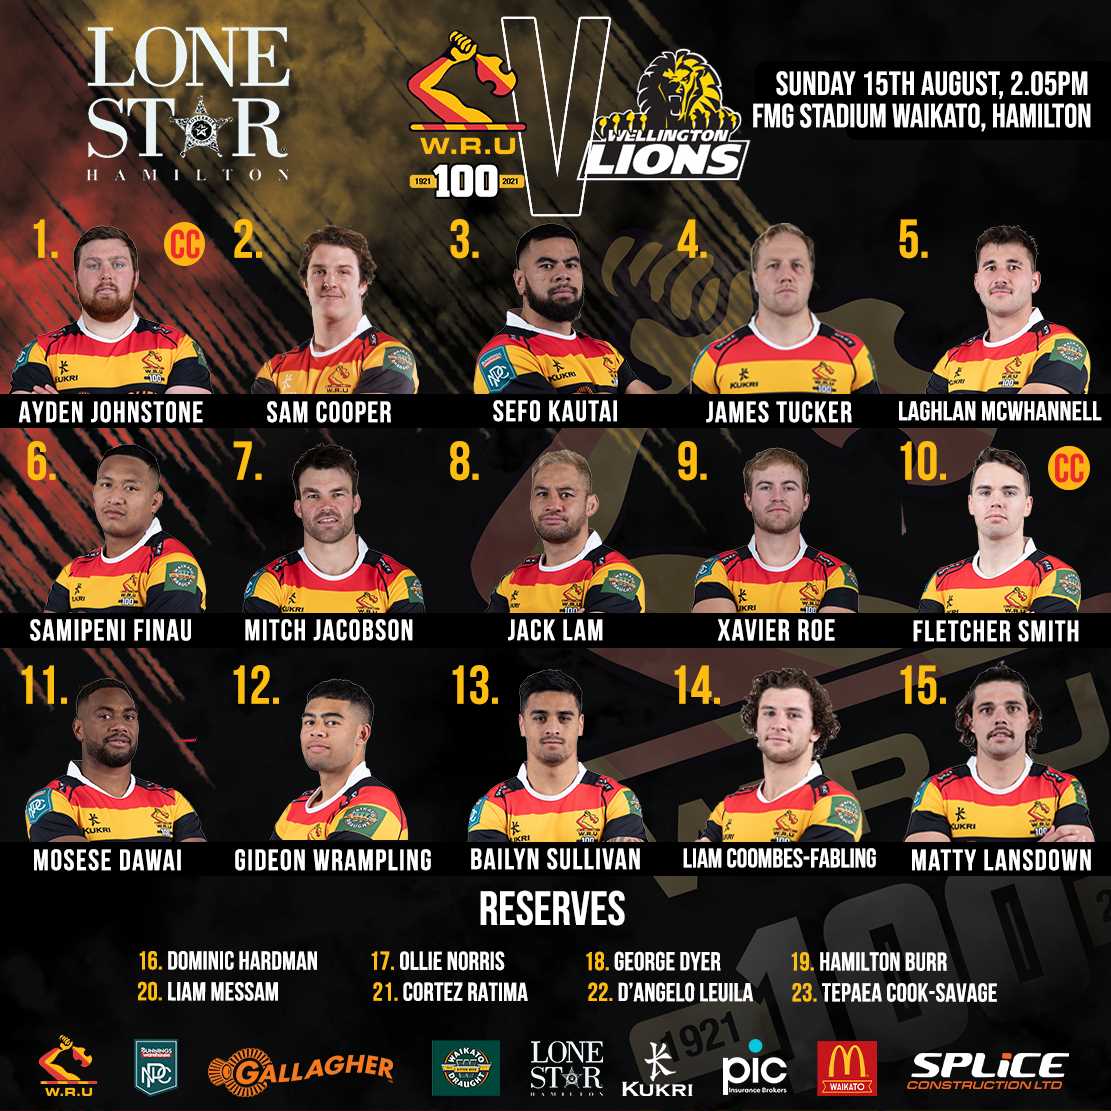 Waikato announce team to take on Wellington Lions for first home game.